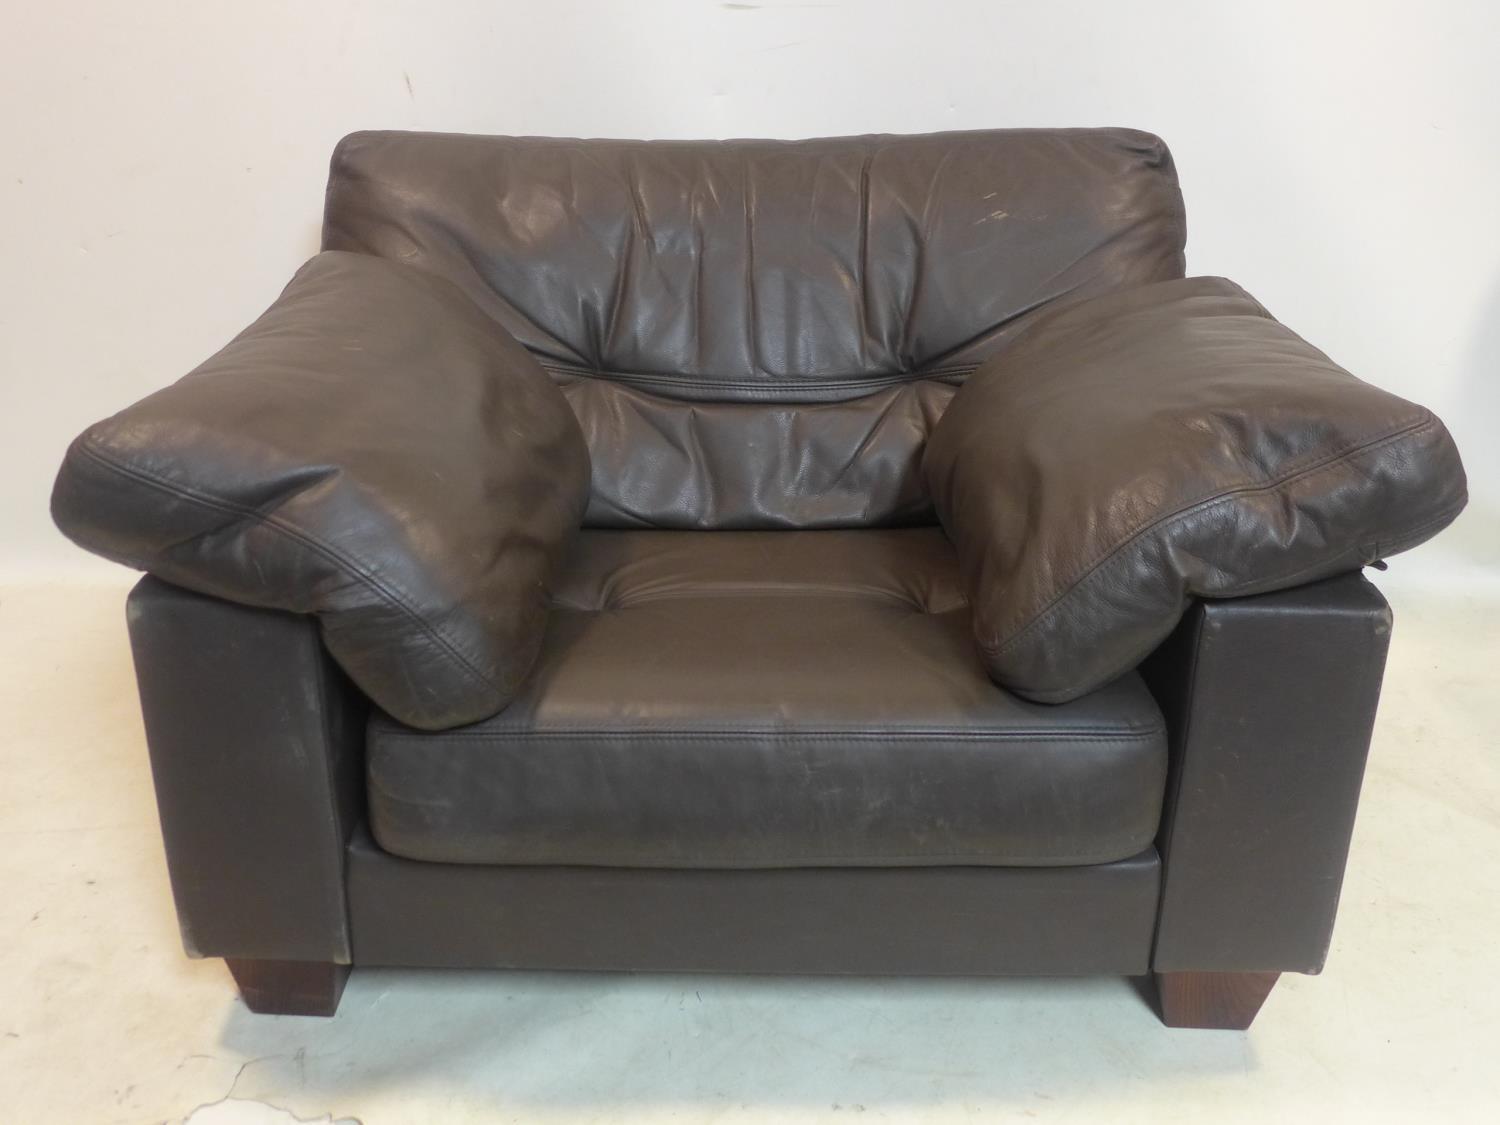 A Heal's brown leather armchair, with makers label